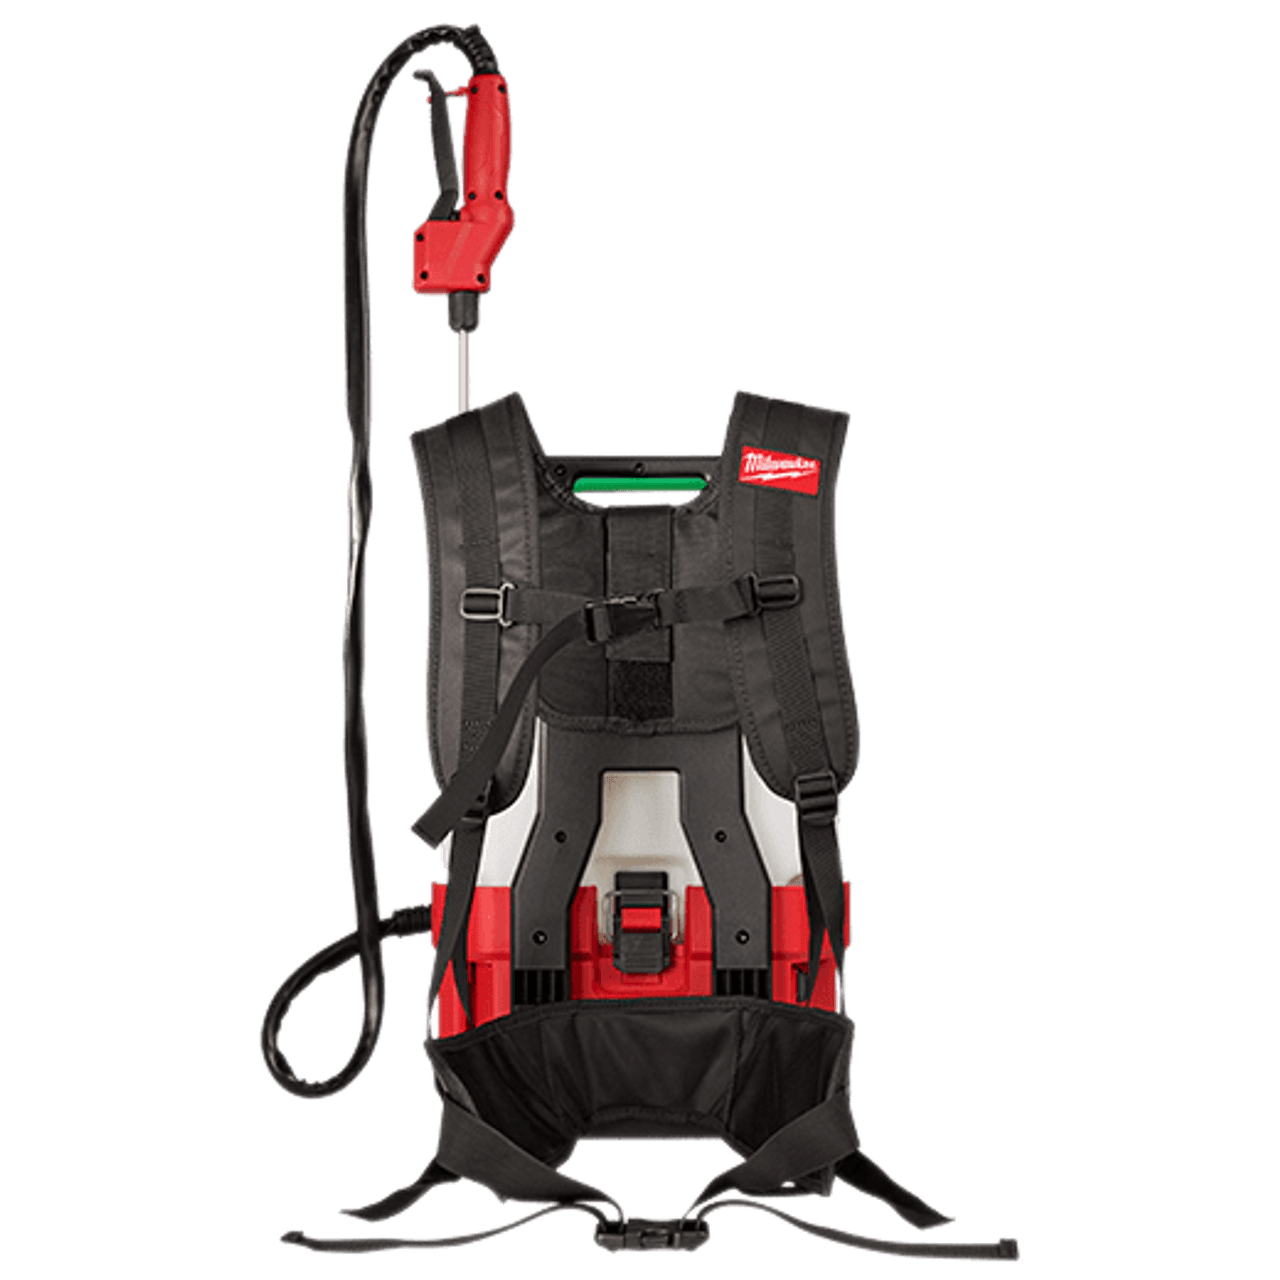 M18 SWITCH TANK 4-Gallon Backpack Sprayer (Tool Only)